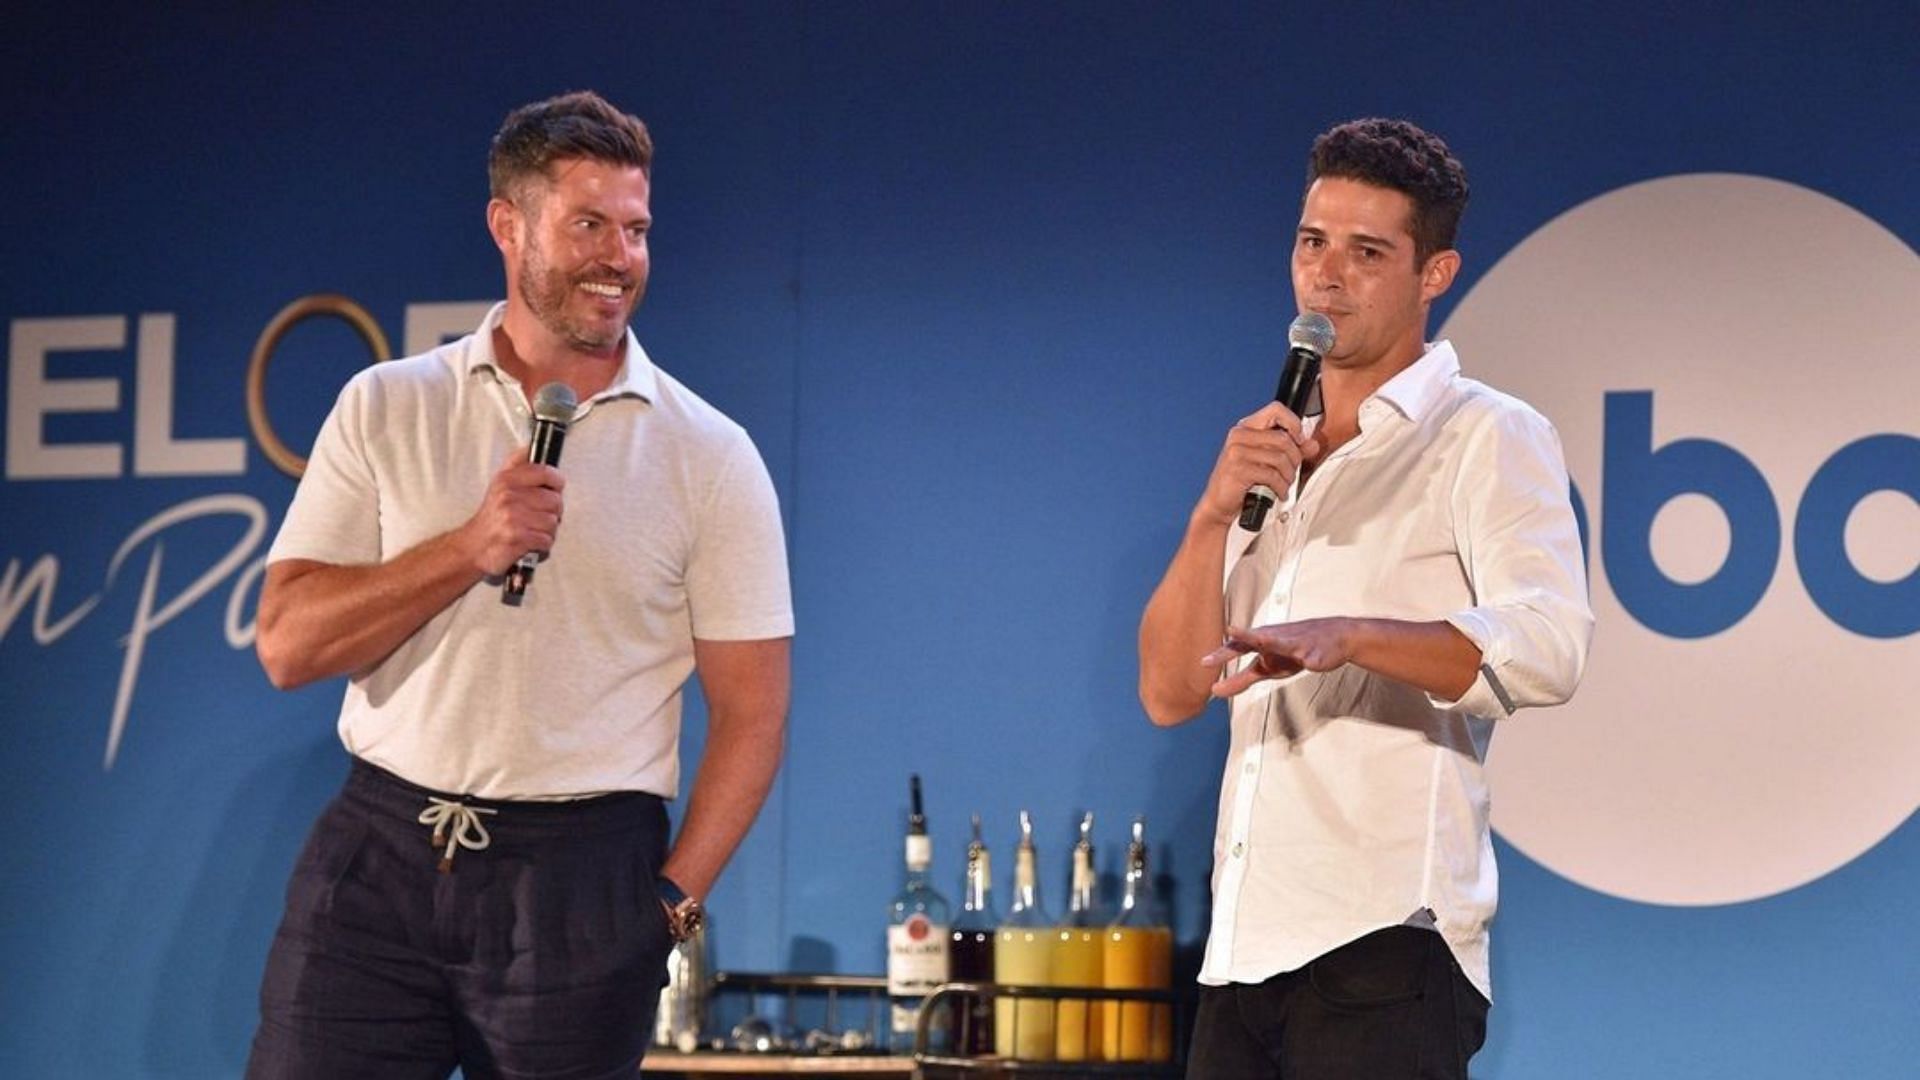 Returning to Bachelor in Paradise are Jesse Palmer and Wells Adams (Image via Instagram/@bachelorinparadise)